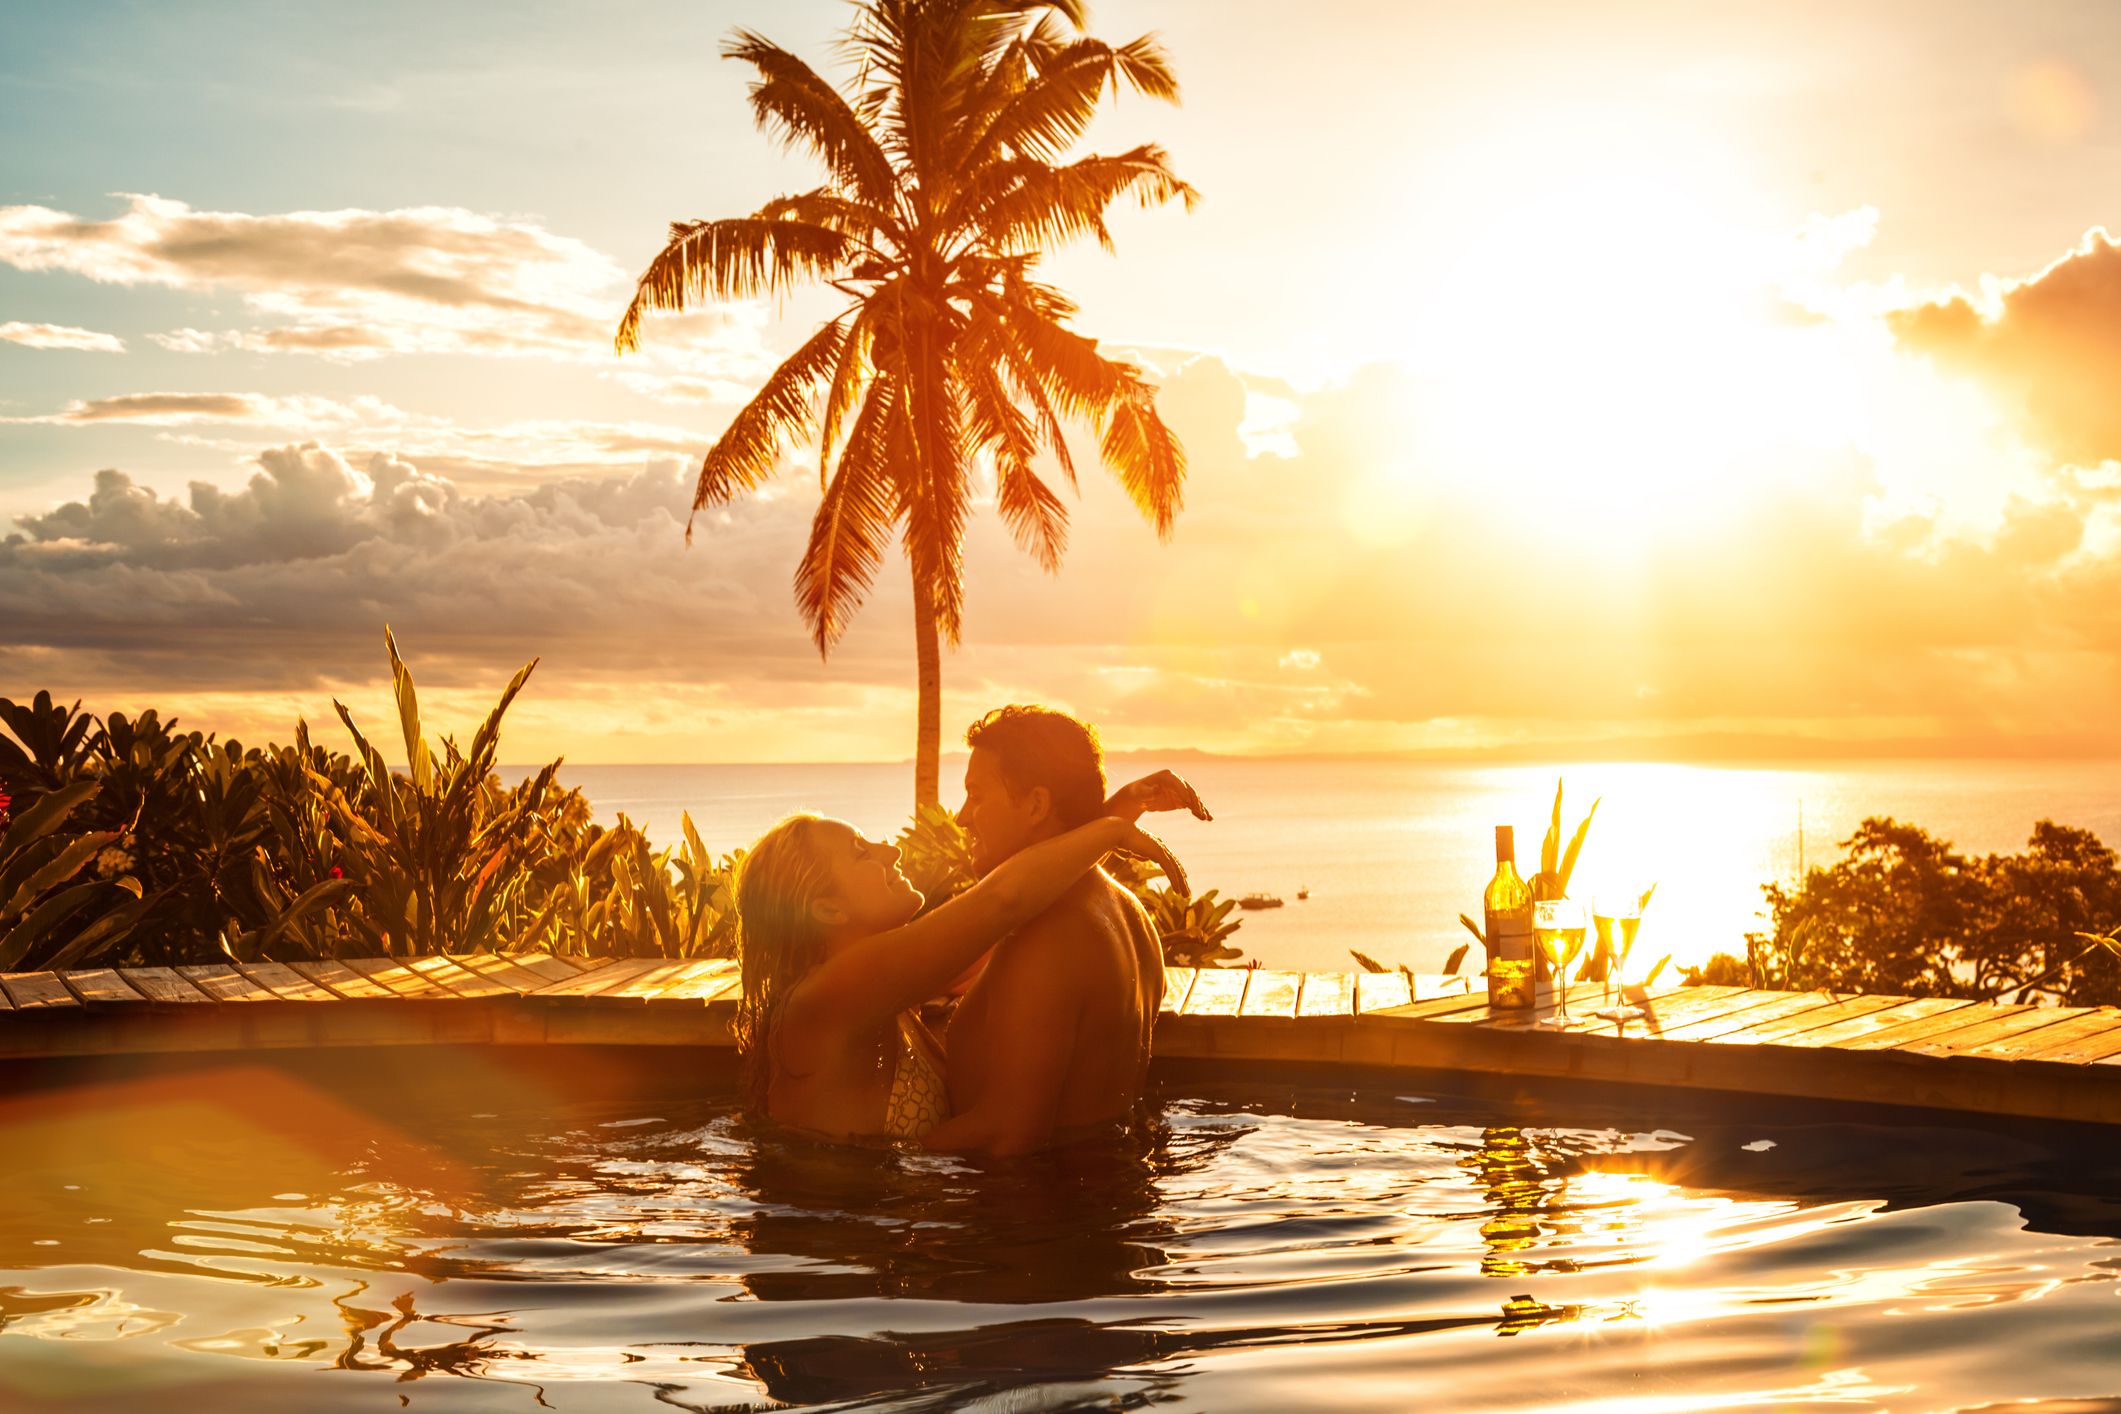 11 Best Sex Resorts And Erotic Vacation Spots In 2023 image